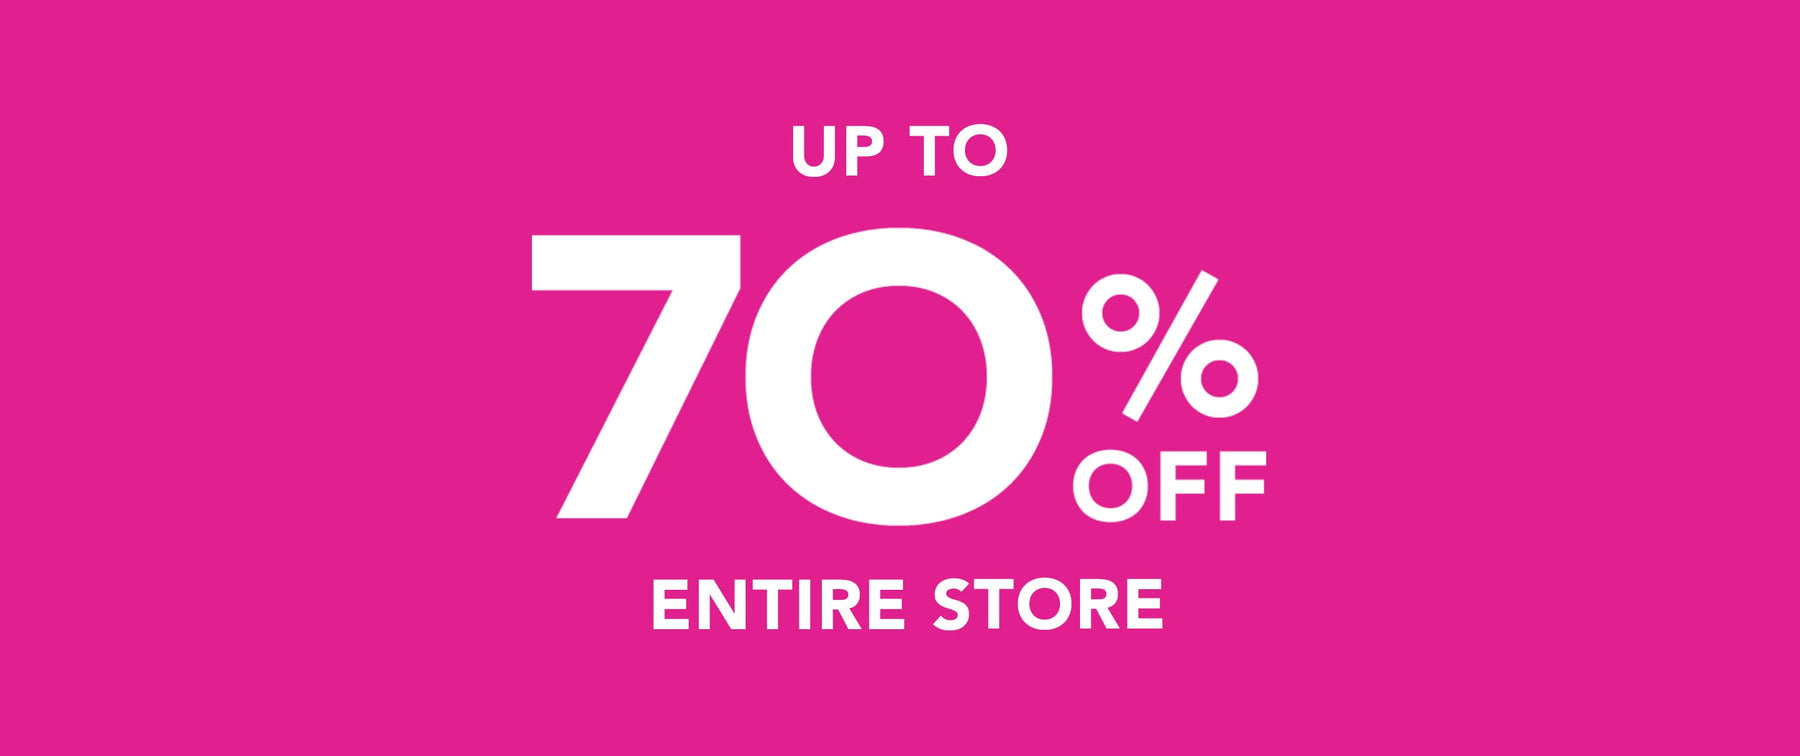 Up to 70% off the entire store 